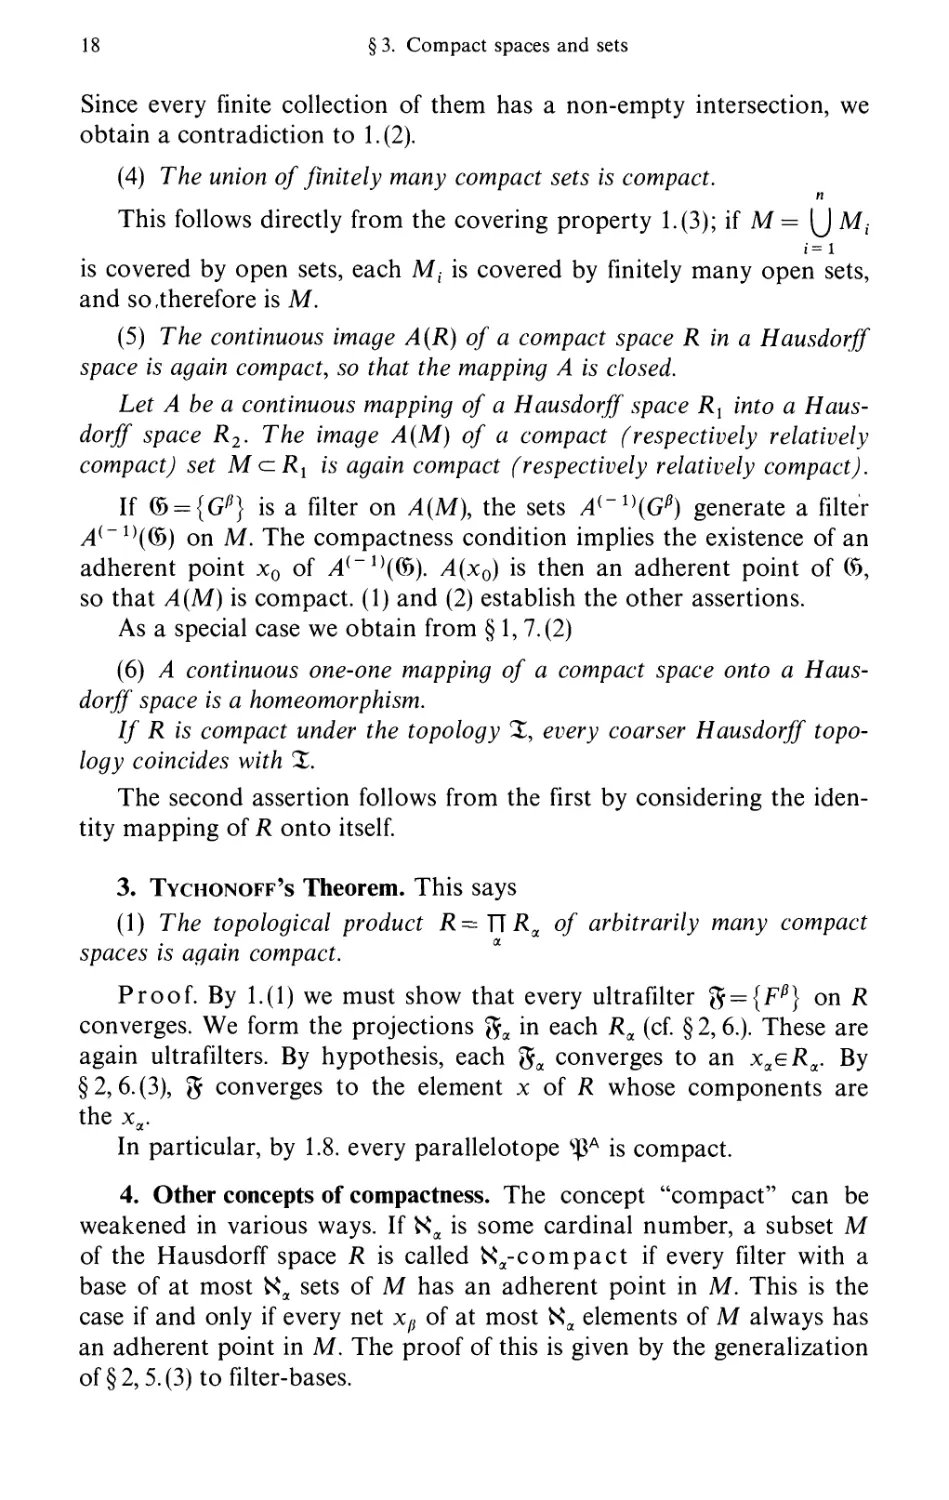 3. Tychonoff's theorem
4. Other concepts of compactness